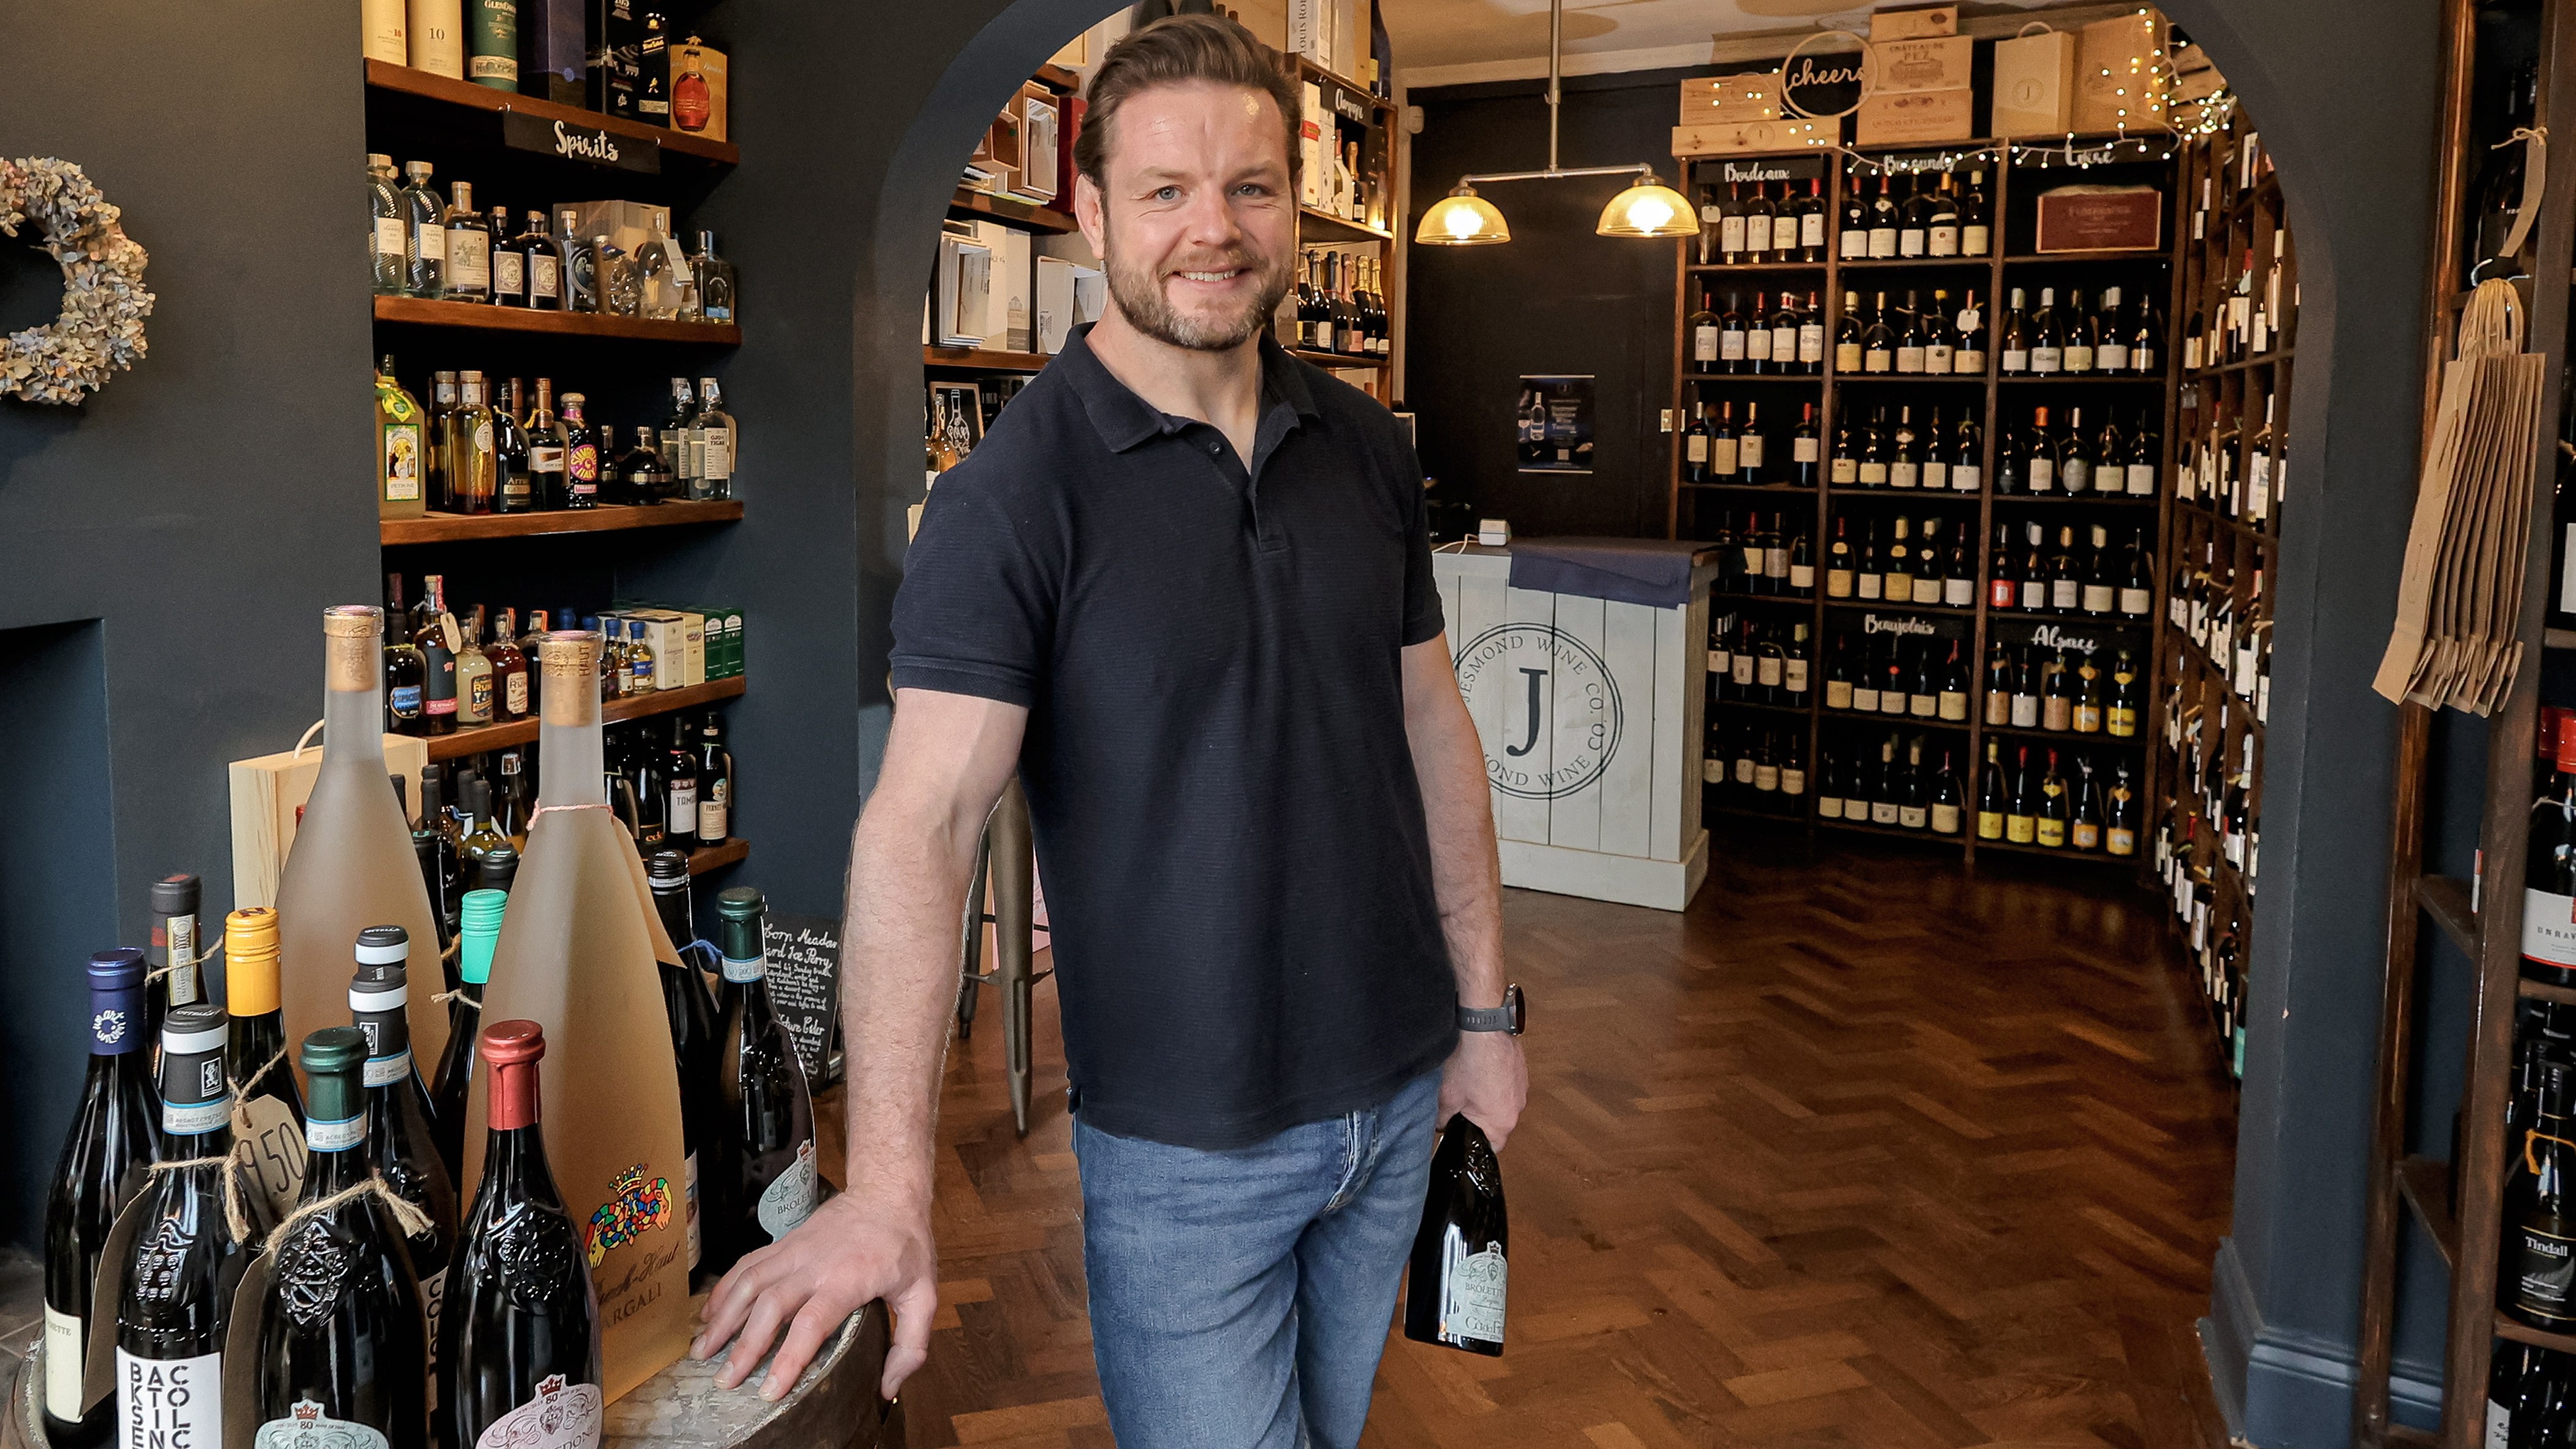 Welsh, who has tasted success in boxing, rugby union and jiujitsu, now runs a wine business